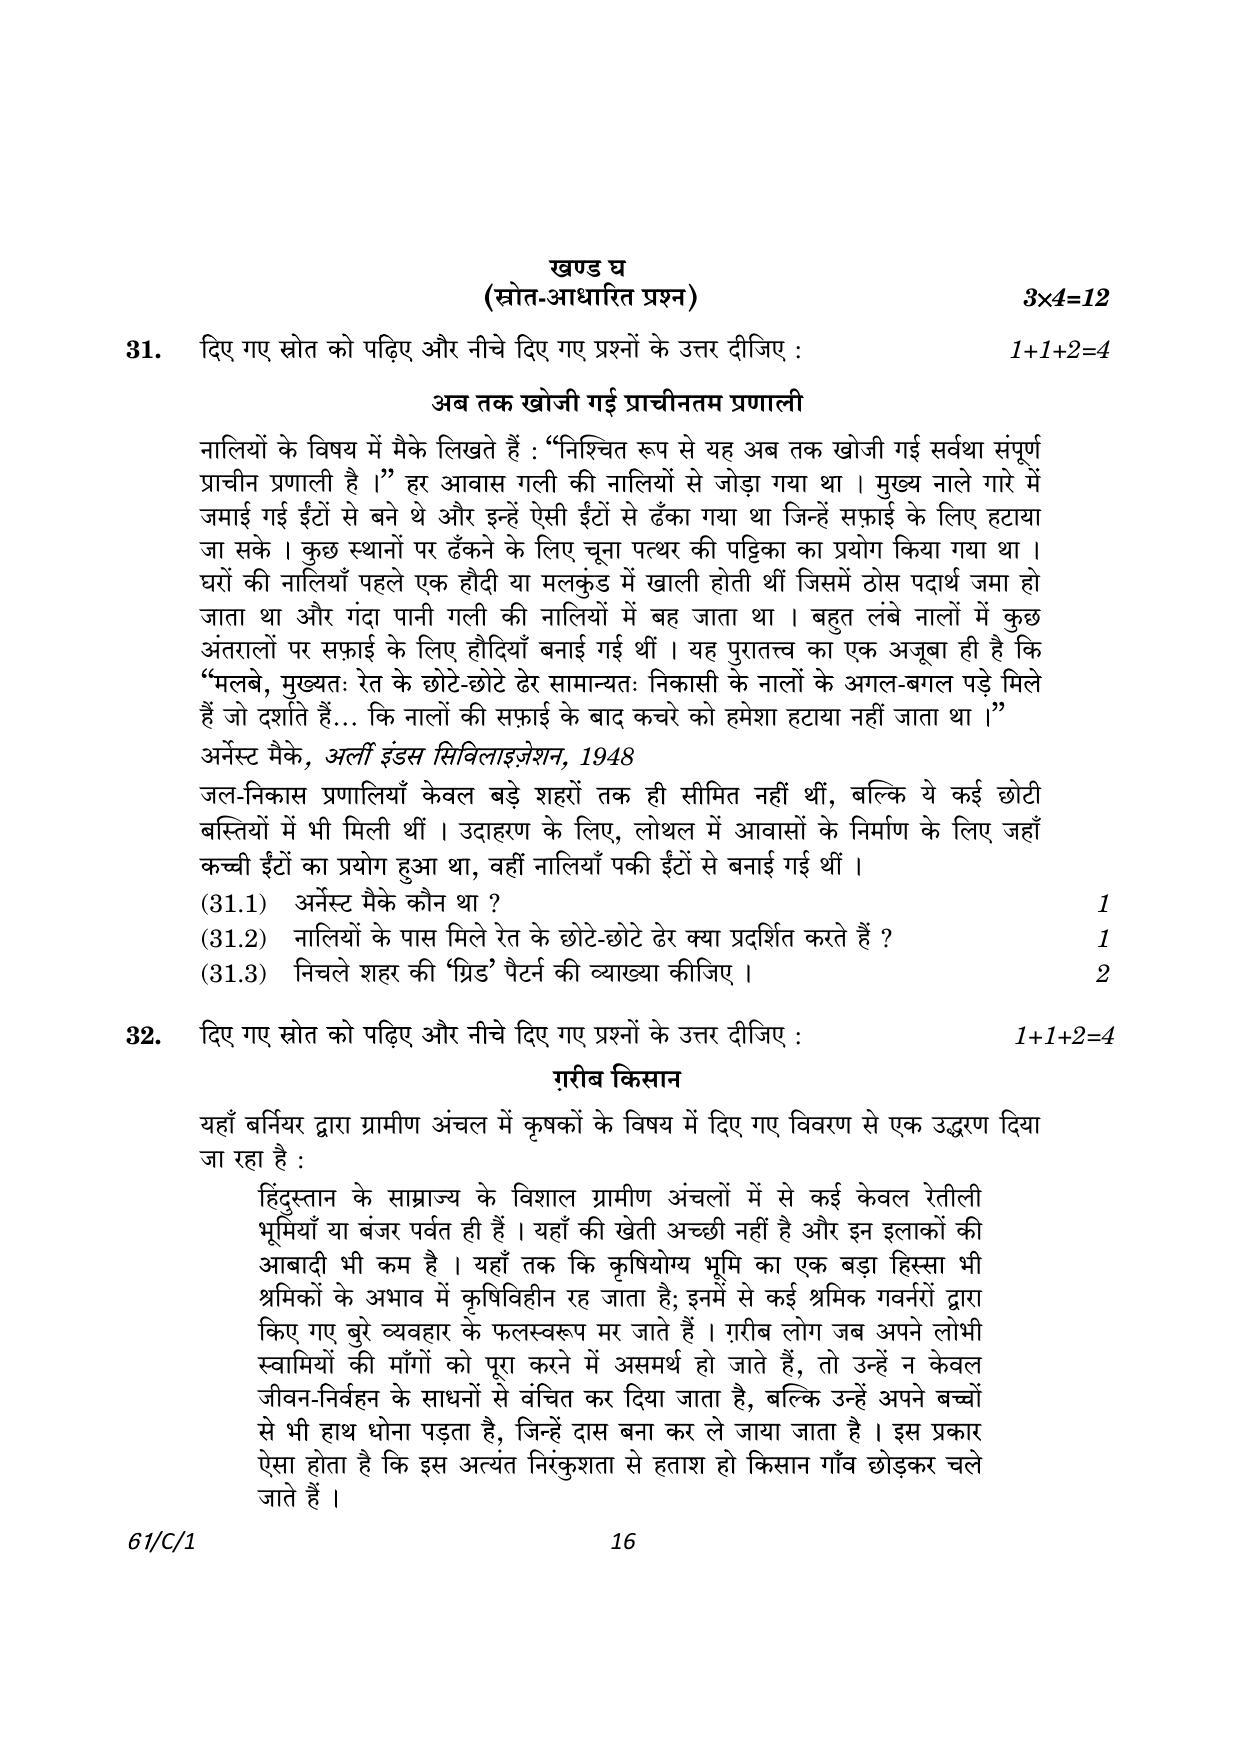 CBSE Class 12 61-1 History 2023 (Compartment) Question Paper - Page 16